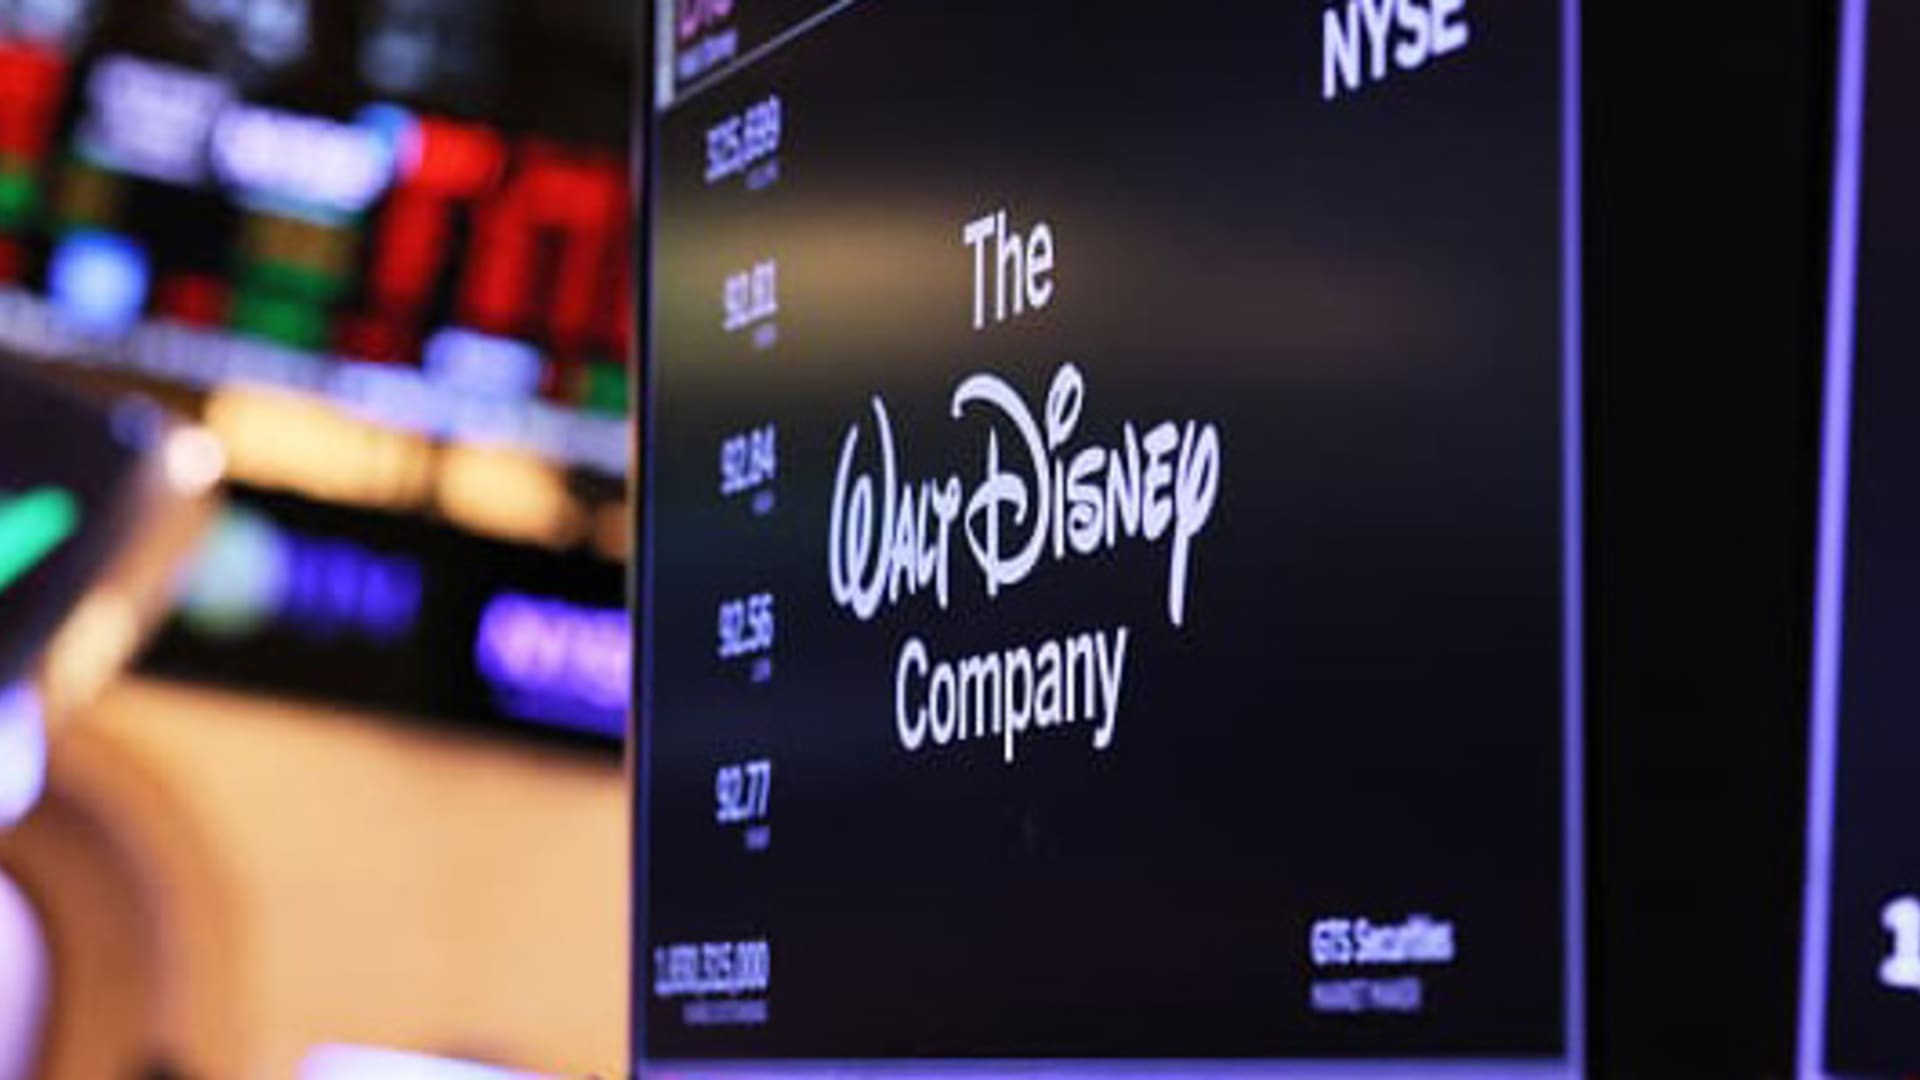 Disney technology executive Aaron LaBerge to leave company for personal reasons - CNBC image